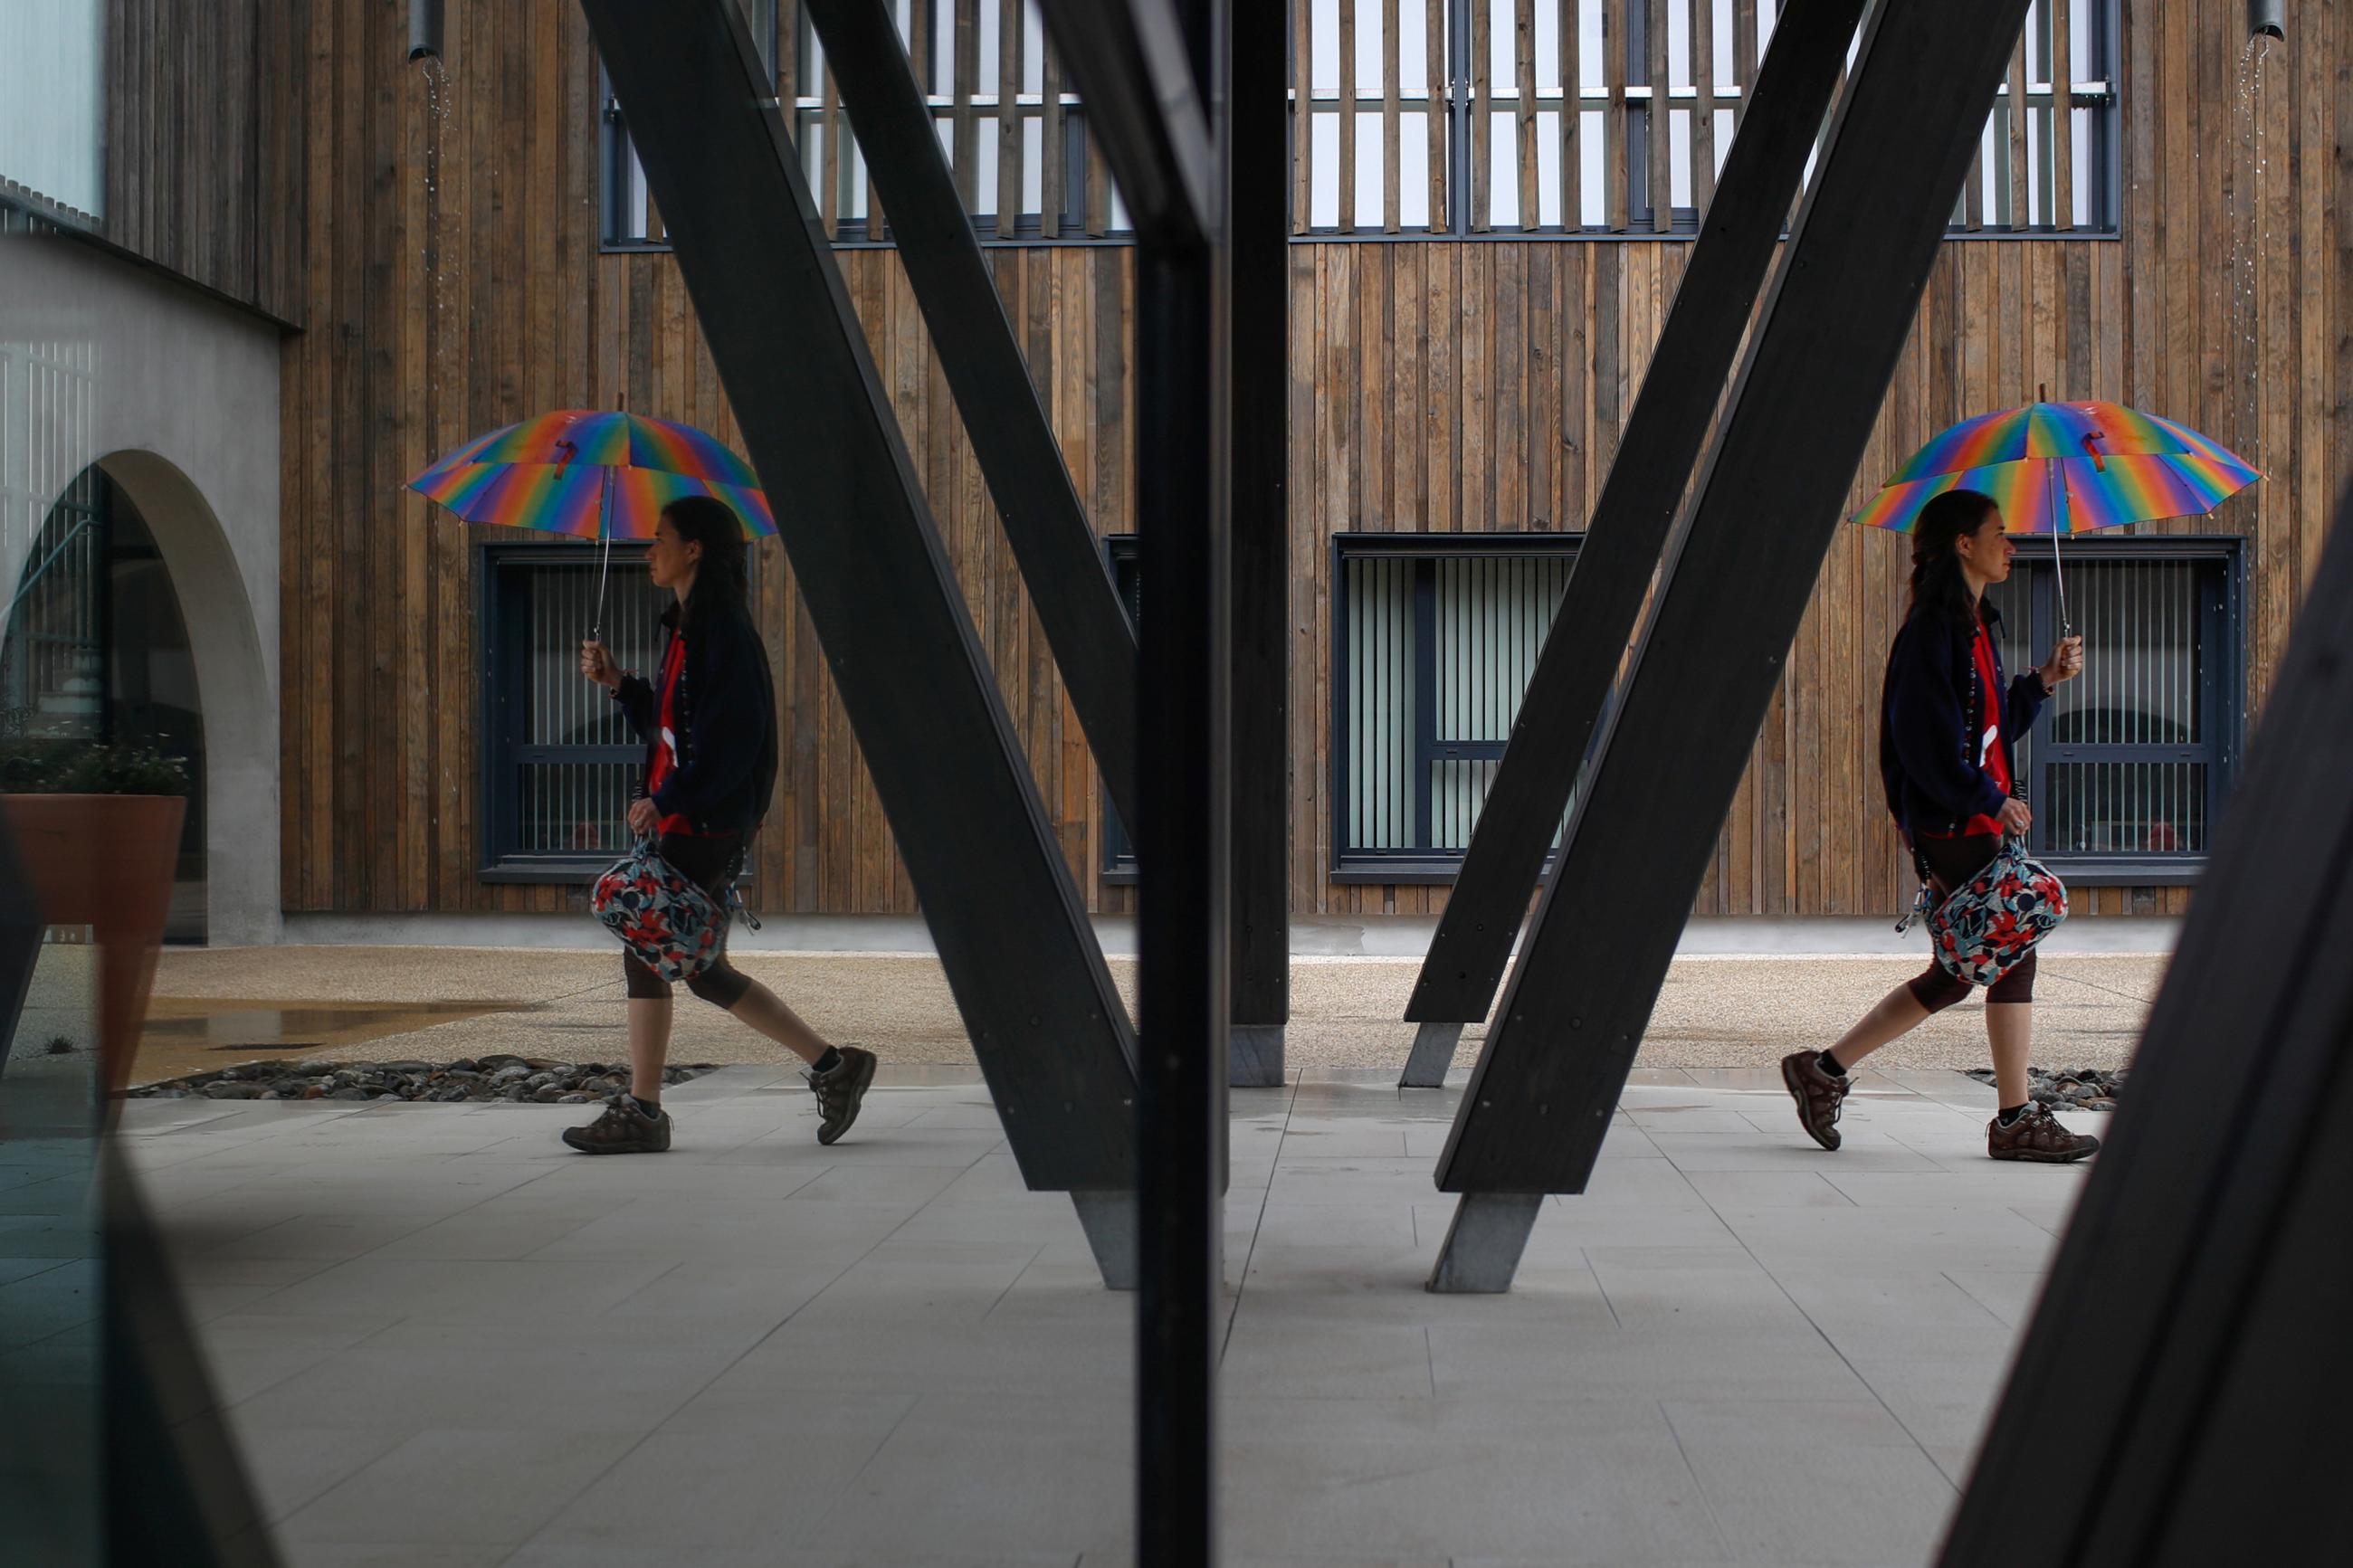 Laetitia, 39, who has Alzheimer's disease, is reflected in a mirror as she walks with a multi-colored umbrella at Village Landais Henri Emmanuelli, in Dax, France, on September 24, 2020. 